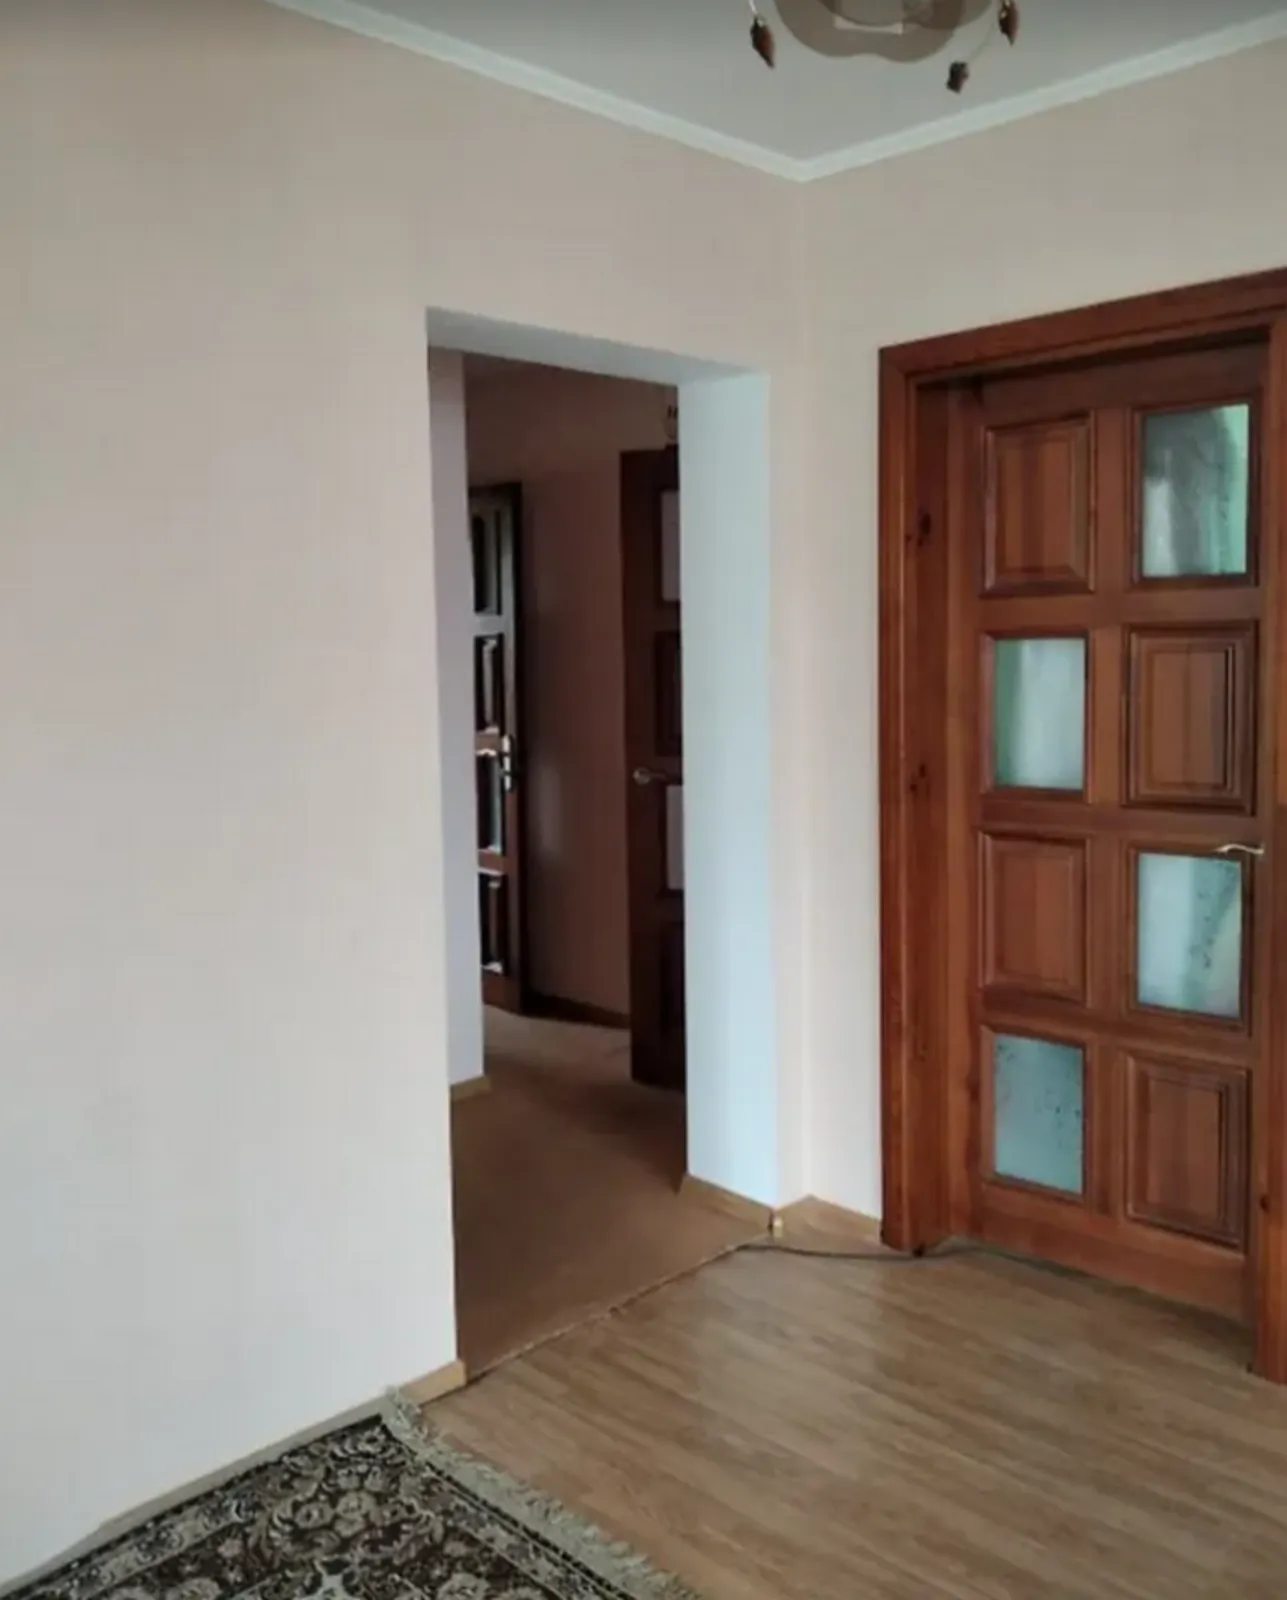 House for sale. 170 m², 2 floors. Petrykov. 